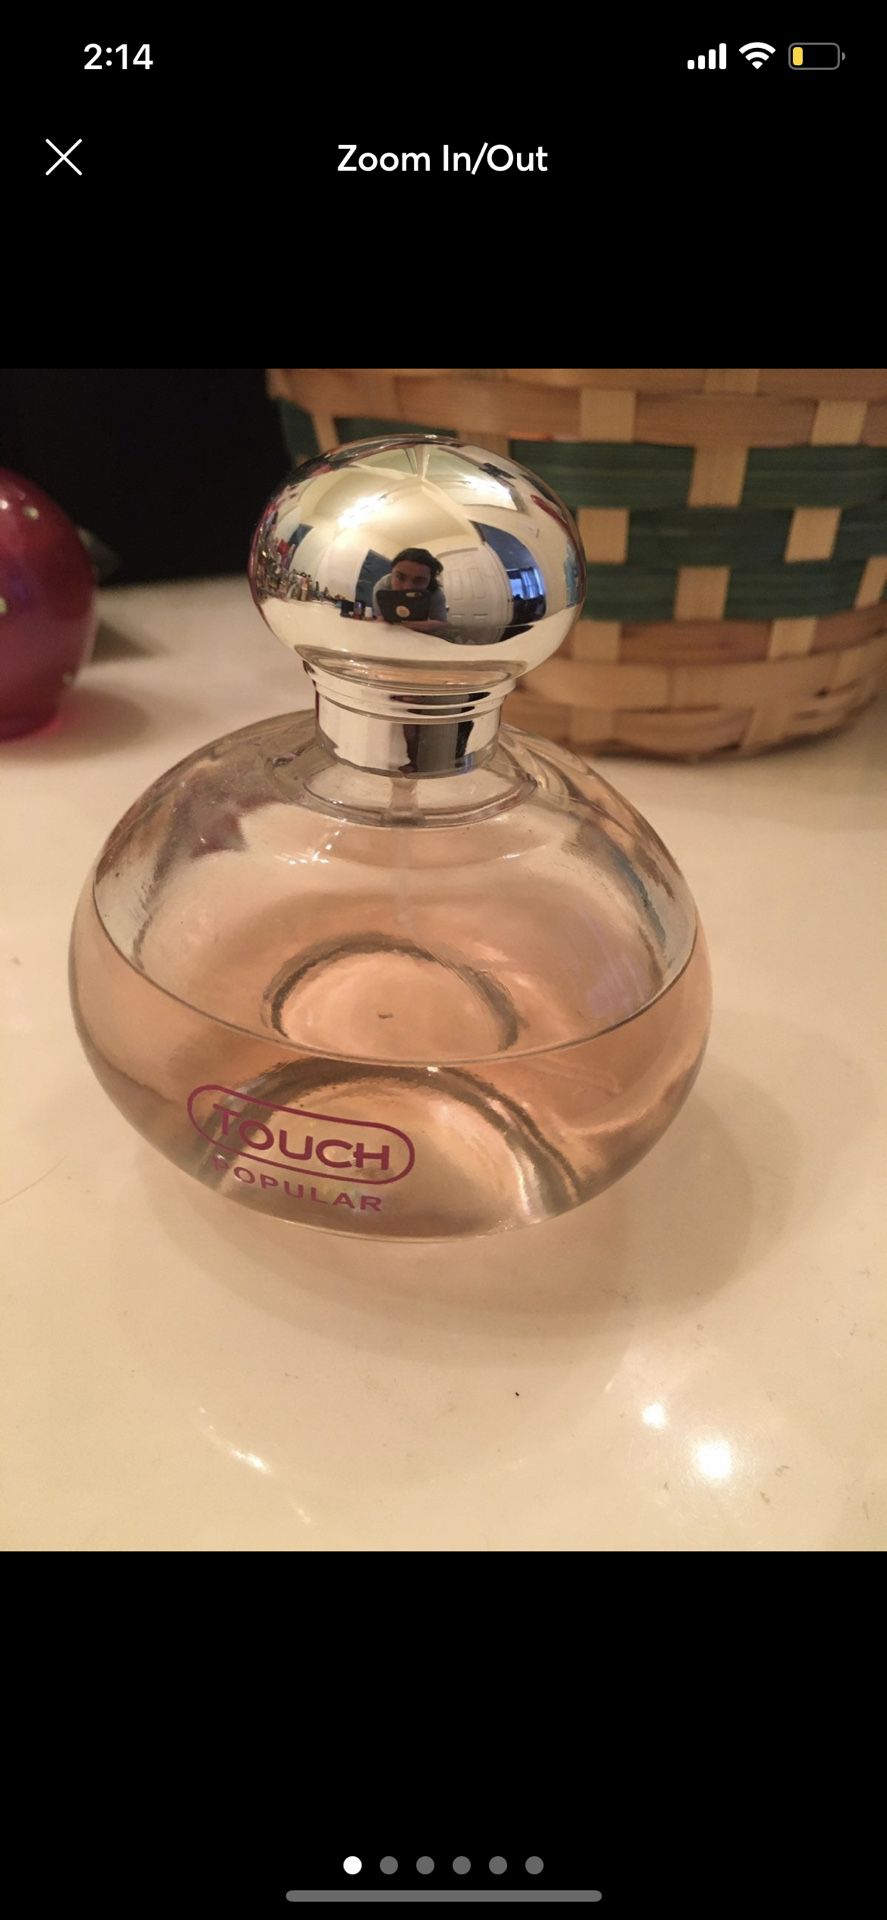 Touch Popular perfume fragrances for women for Sale in Elk Grove, CA -  OfferUp